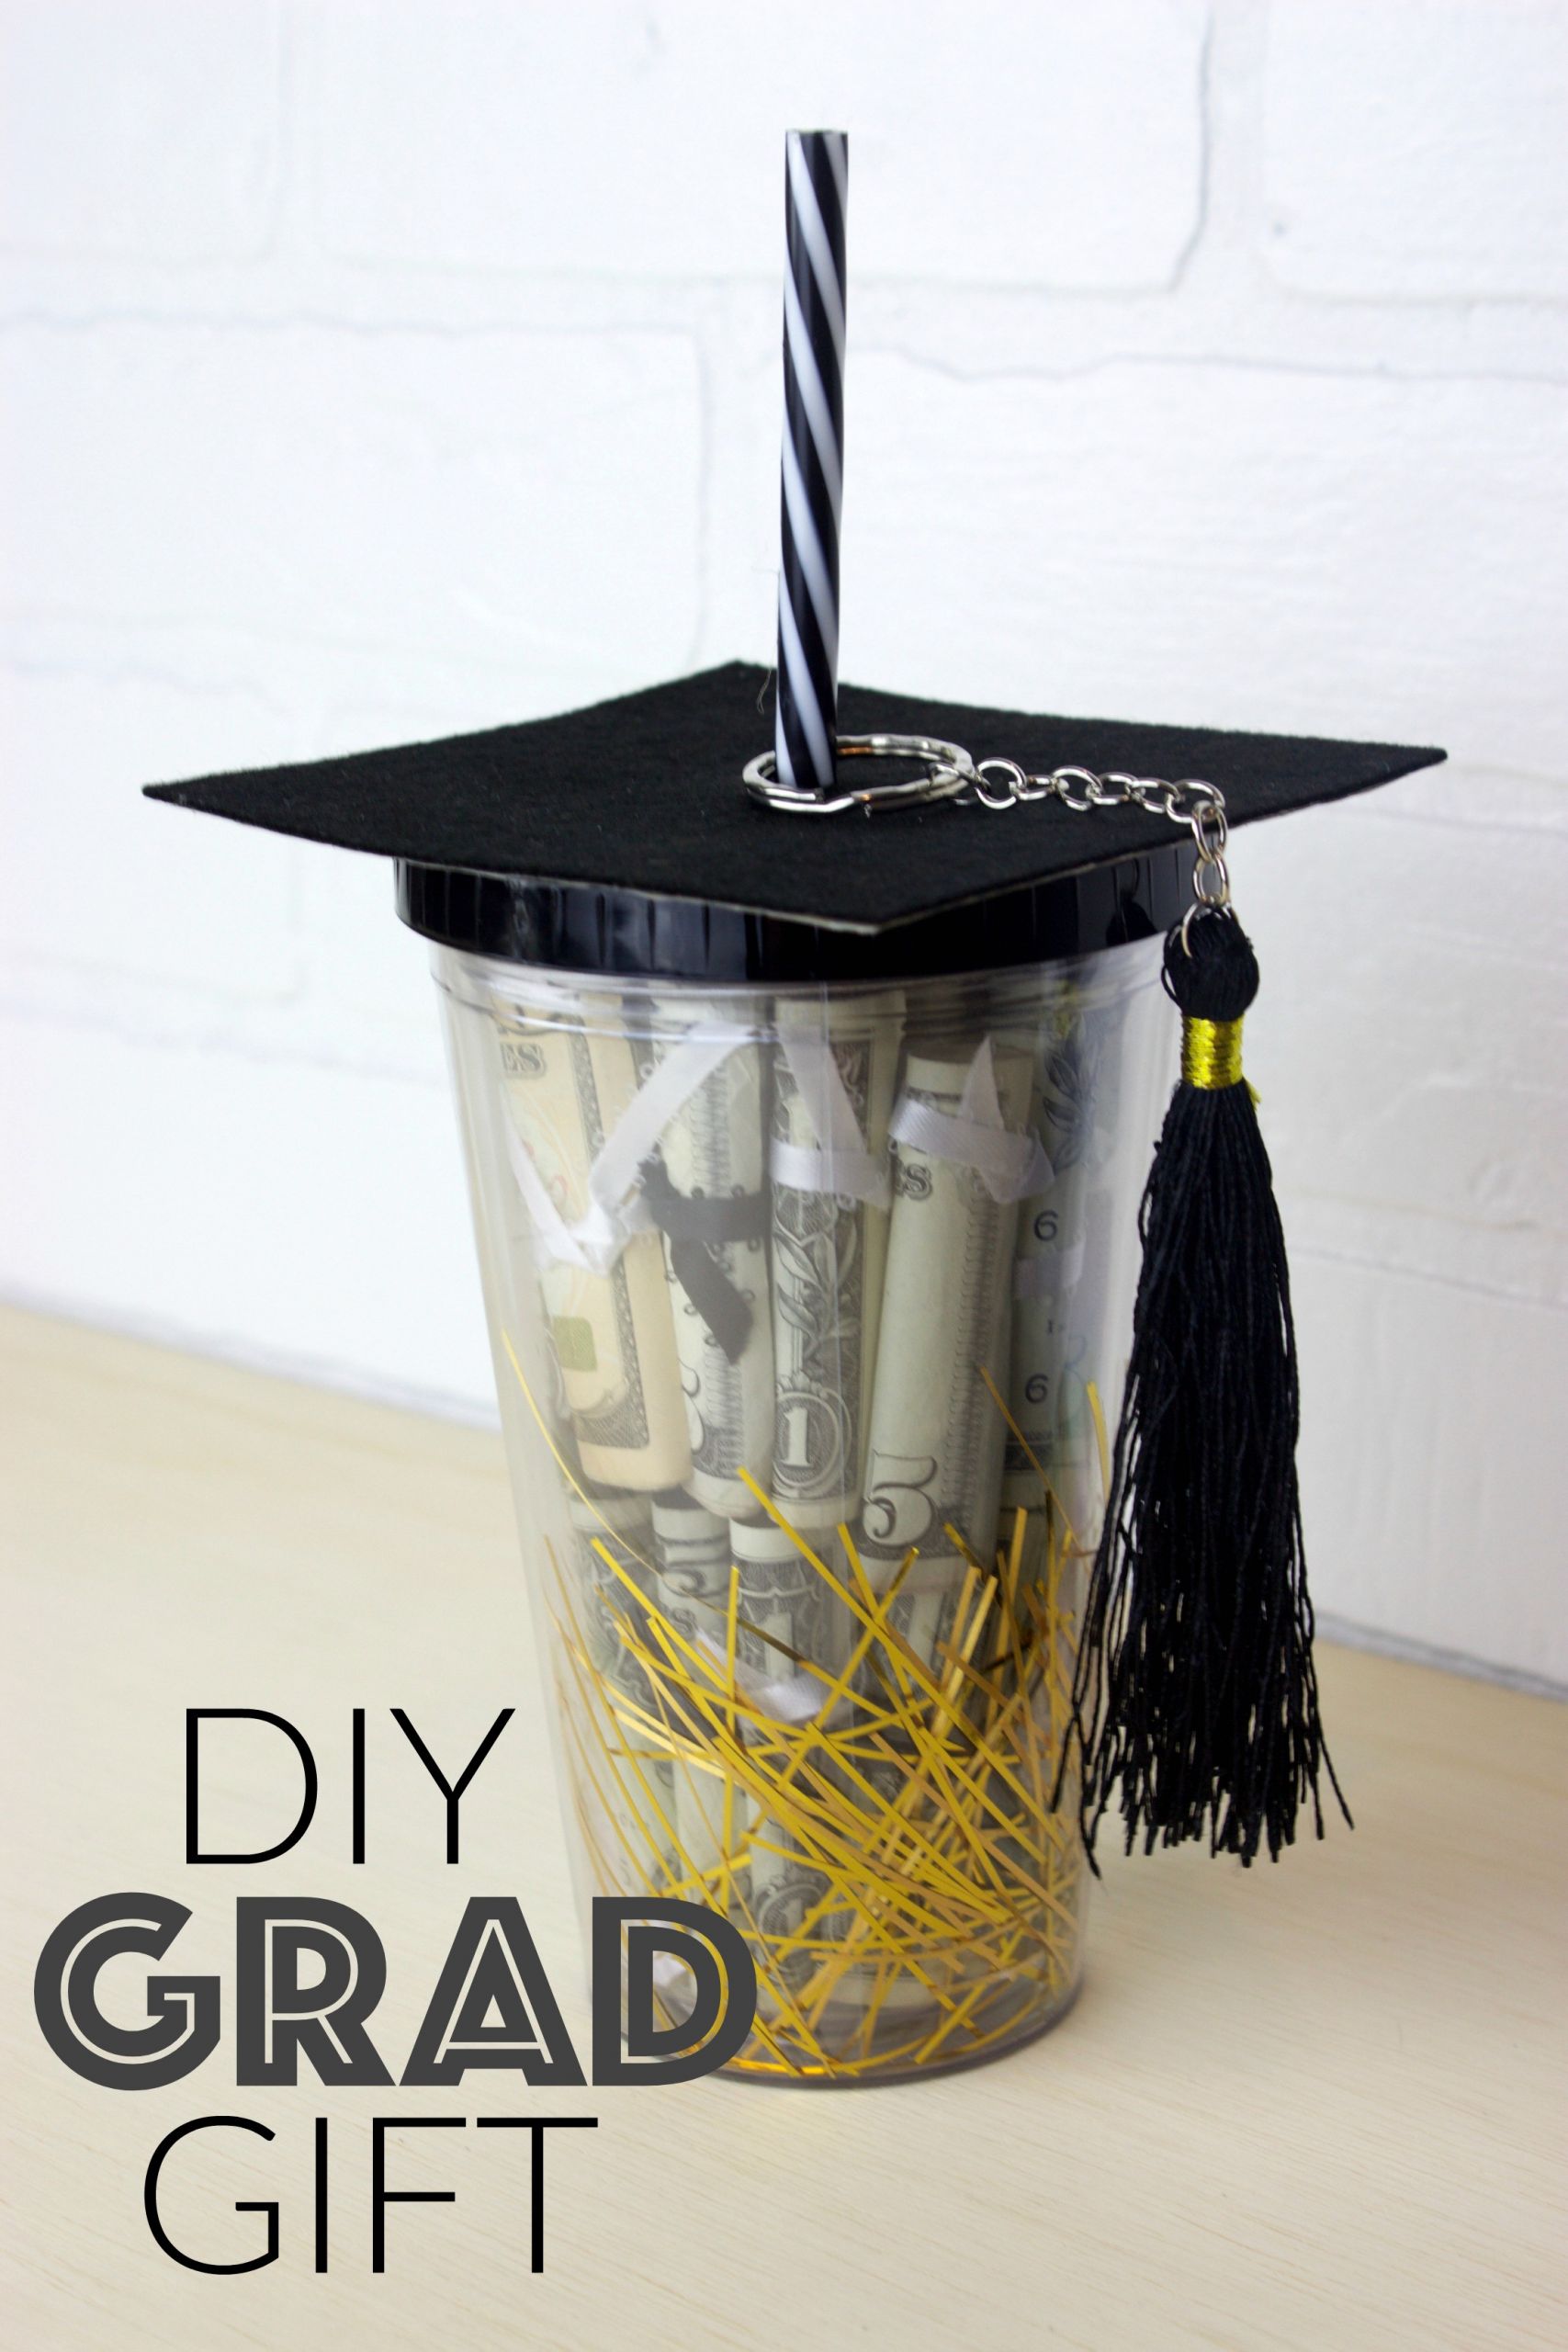 DIY Graduation Gifts
 DIY Graduation Gift in a CupA Little Craft In Your Day